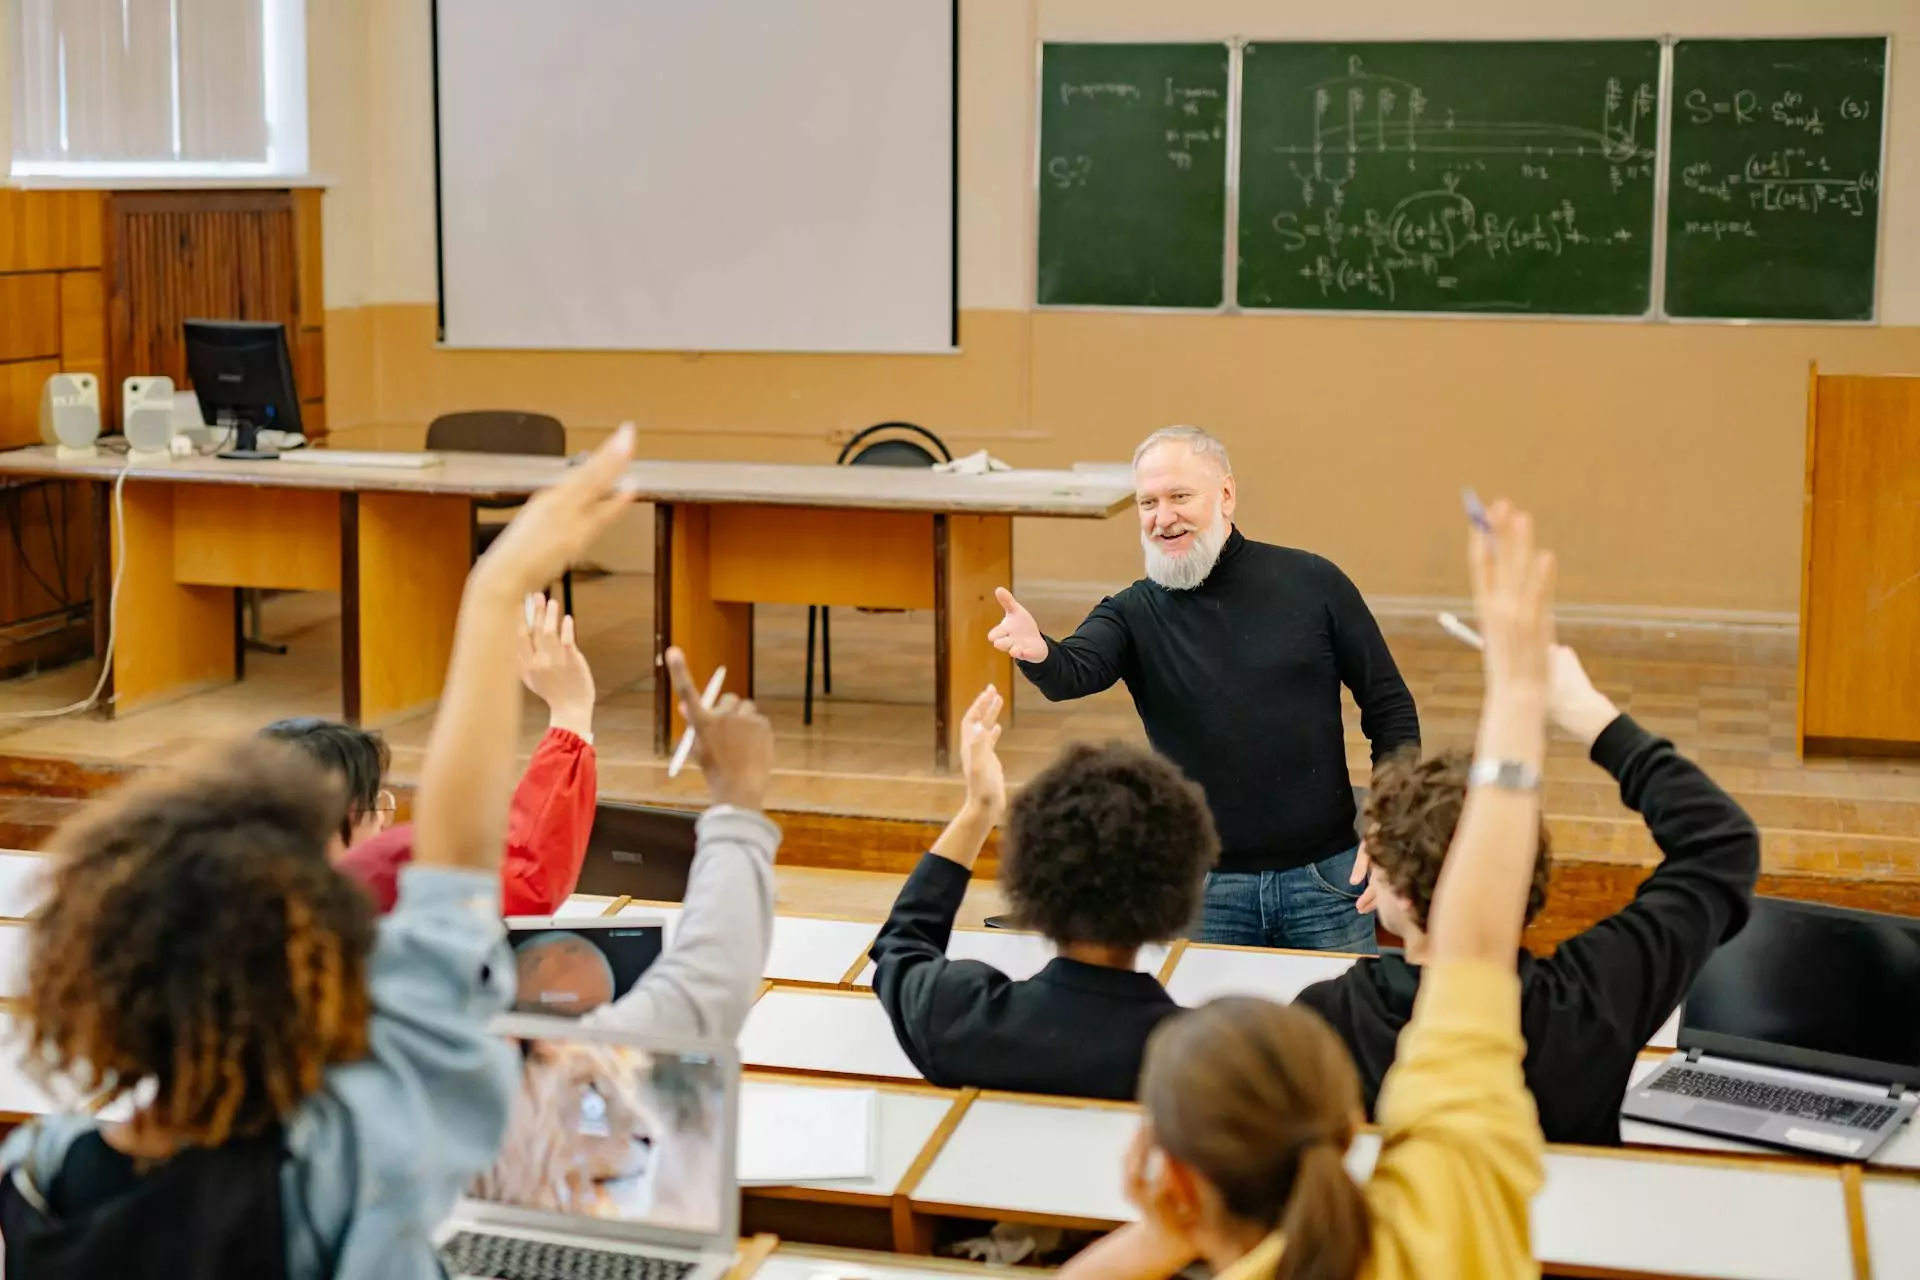 A group of students raising their hands to participate in class.